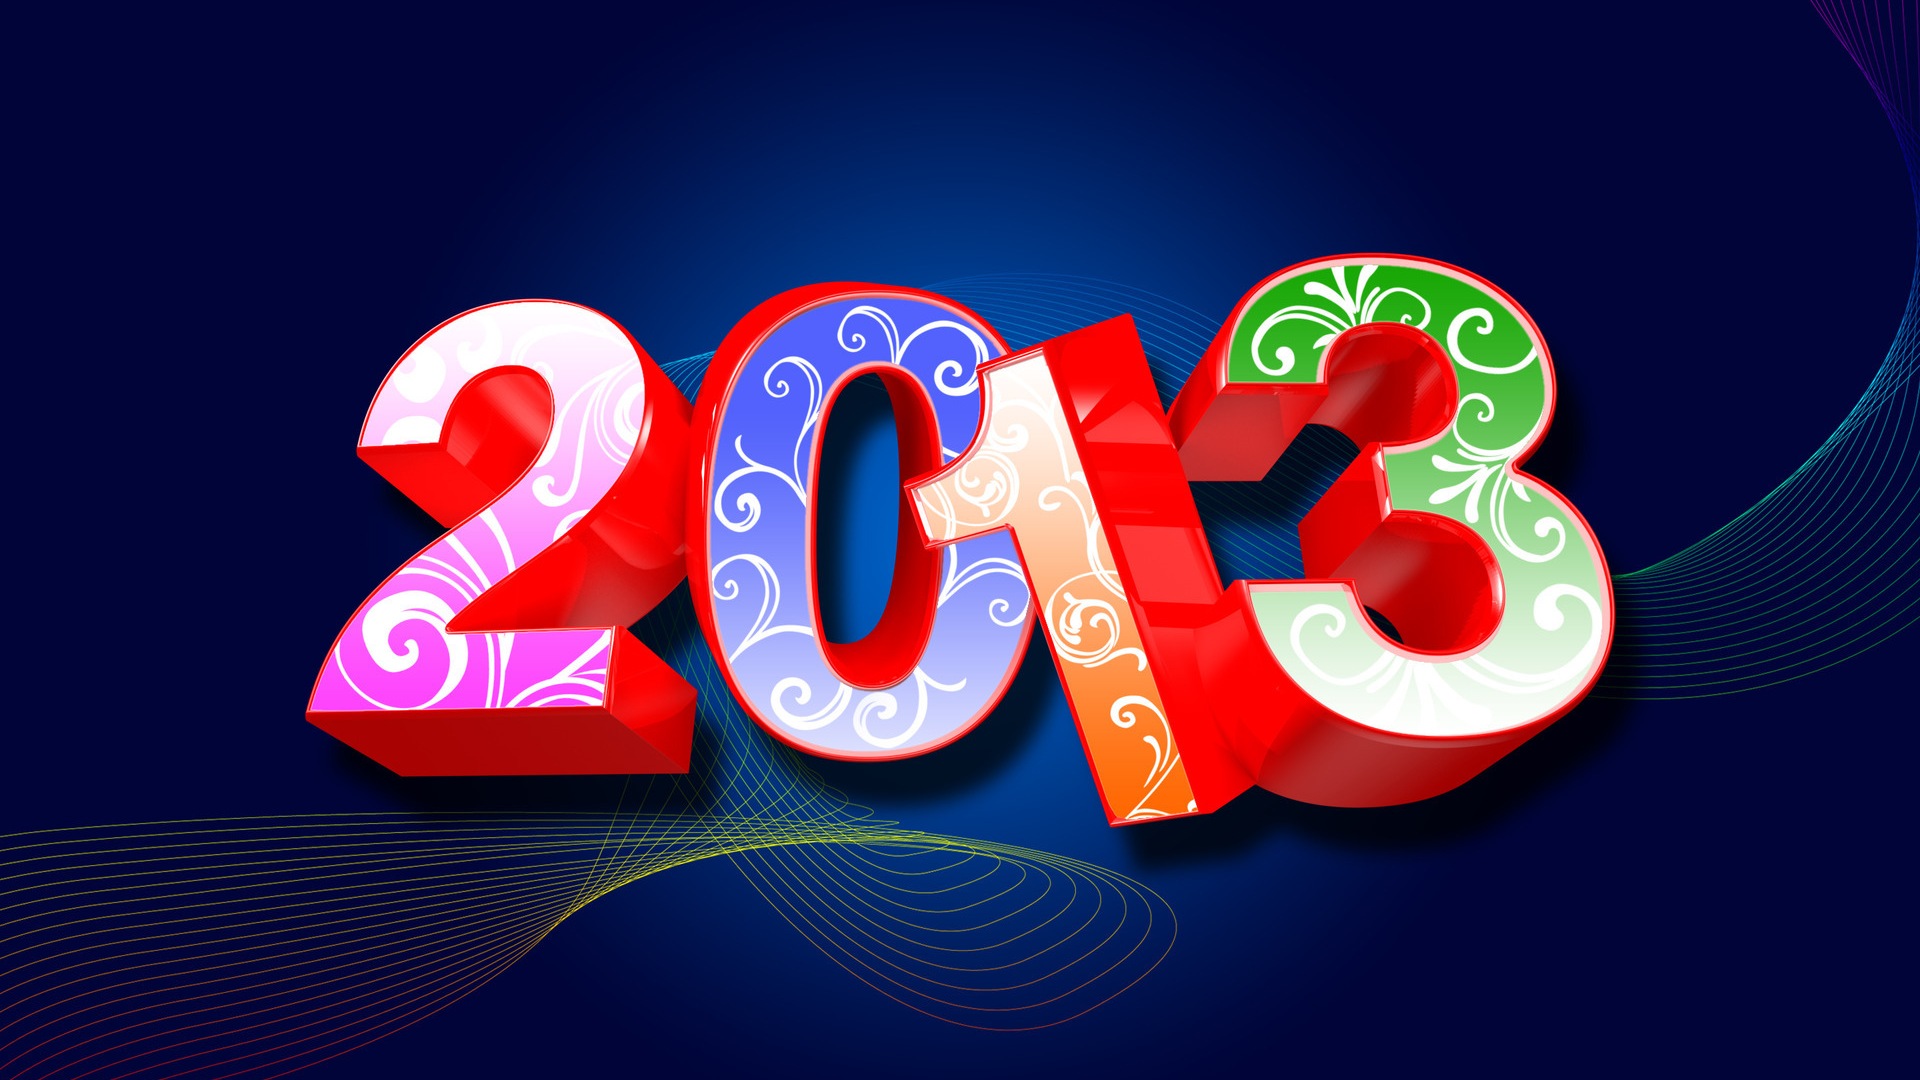 2013 Silvester Thema kreative Tapete (1) #12 - 1920x1080